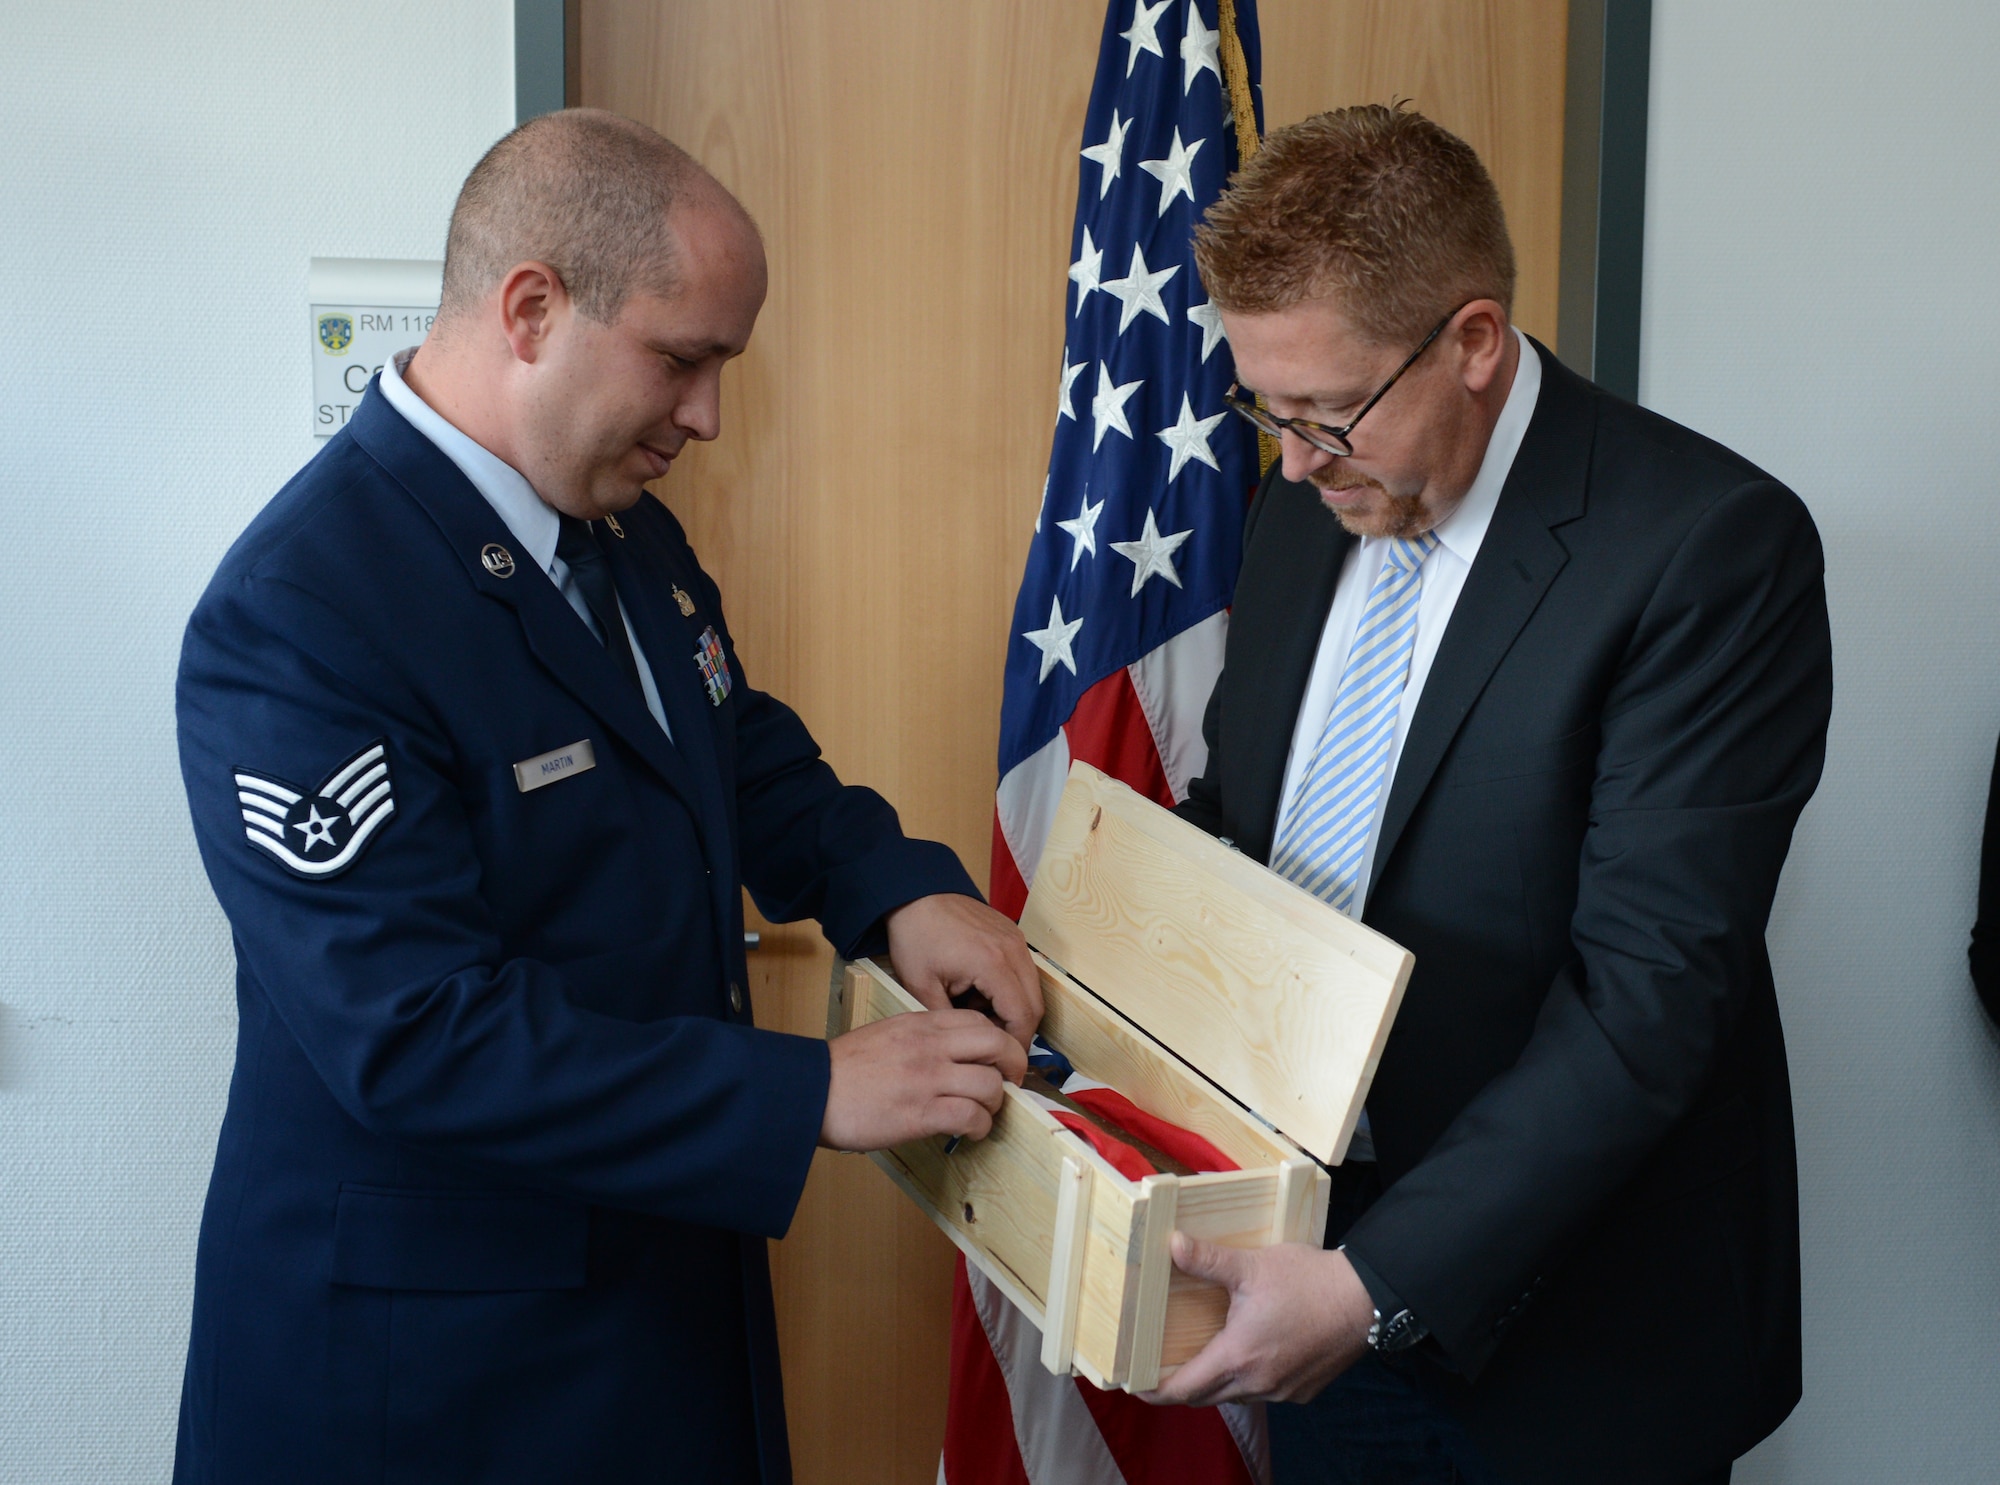 SPANGDAHLEM AIR BASE, Germany – Marco Haas presents a bayonet to U.S. Air Force Staff Sgt. Scott Martin, 606th Air Control Squadron radio frequencies transmissions systems operator from Chico, Calif., during a ceremony at the 606th ACS Oct. 4, 2012. The bayonet belonged to U.S. Army Pfc. Clyde Sparks, the grandfather of Martin’s wife, Jessica, who fought in Luxembourg during World War II. Martin accepted the bayonet on behalf of his wife’s family, who were unable to attend the ceremony. (U.S. Air Force photo by Staff Sgt. Nathanael Callon/Released)